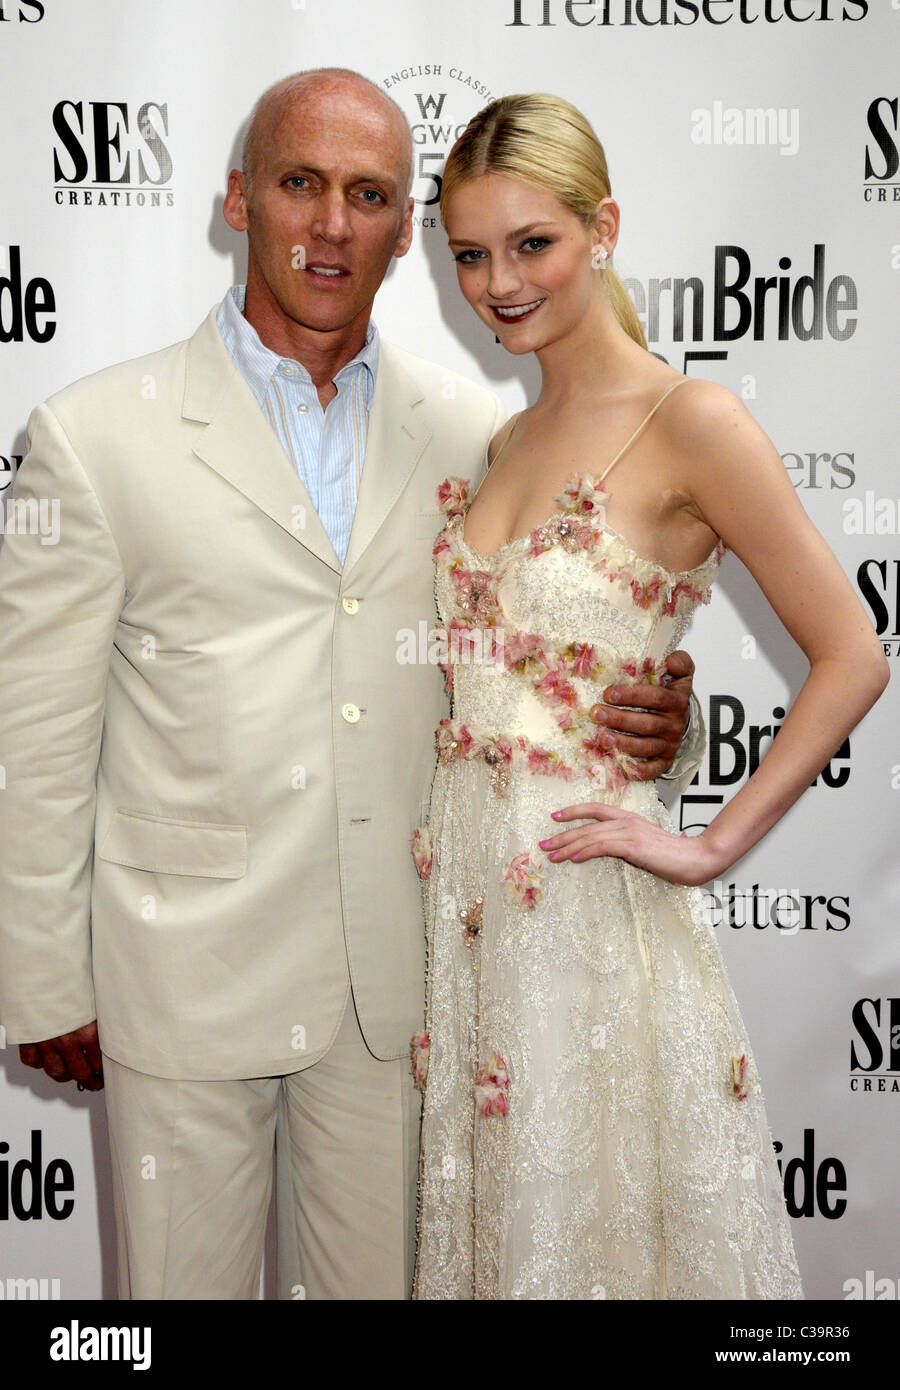 David Kirsch and Lydia Hearst at Modern Bride's '25 Trendsetters of 2009' Awards - Arrivals New York City, USA - 11.05.09 Stock Photo